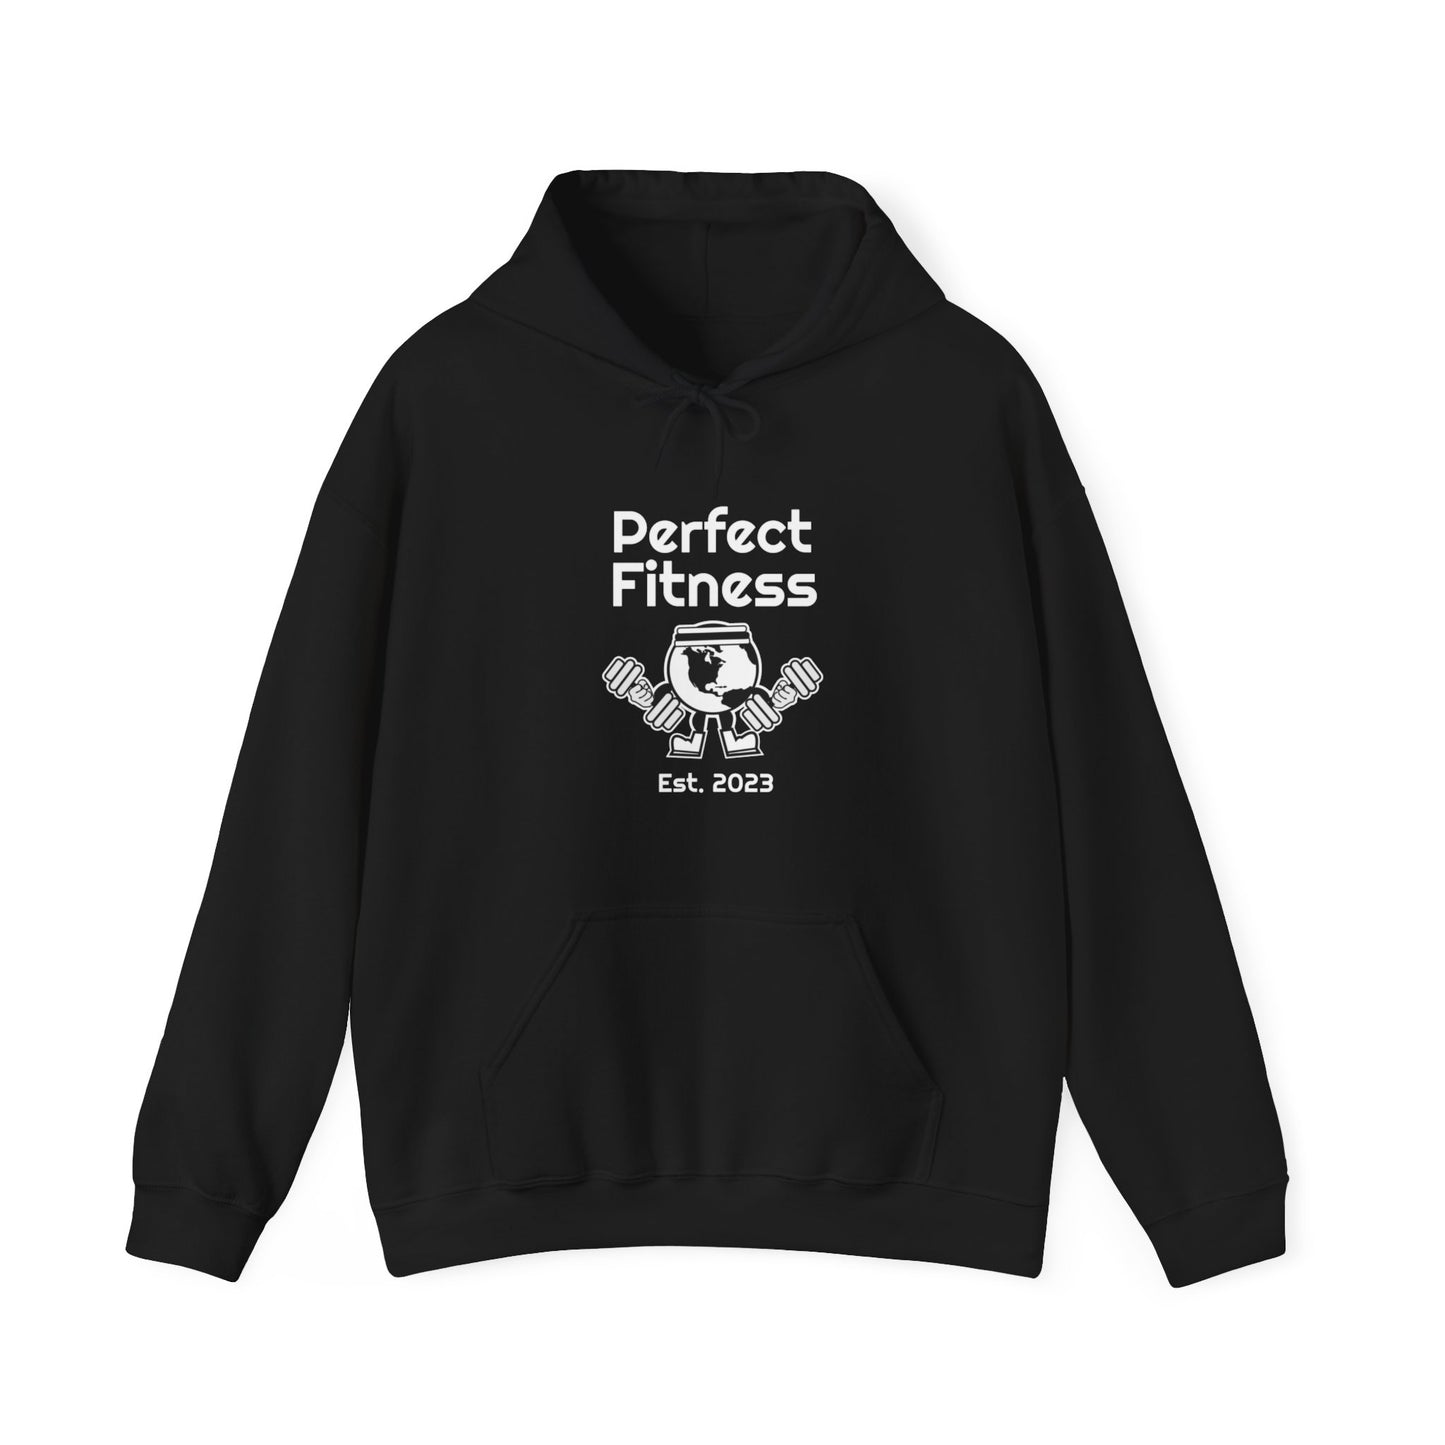 "Perfect Fitness" Hoodie